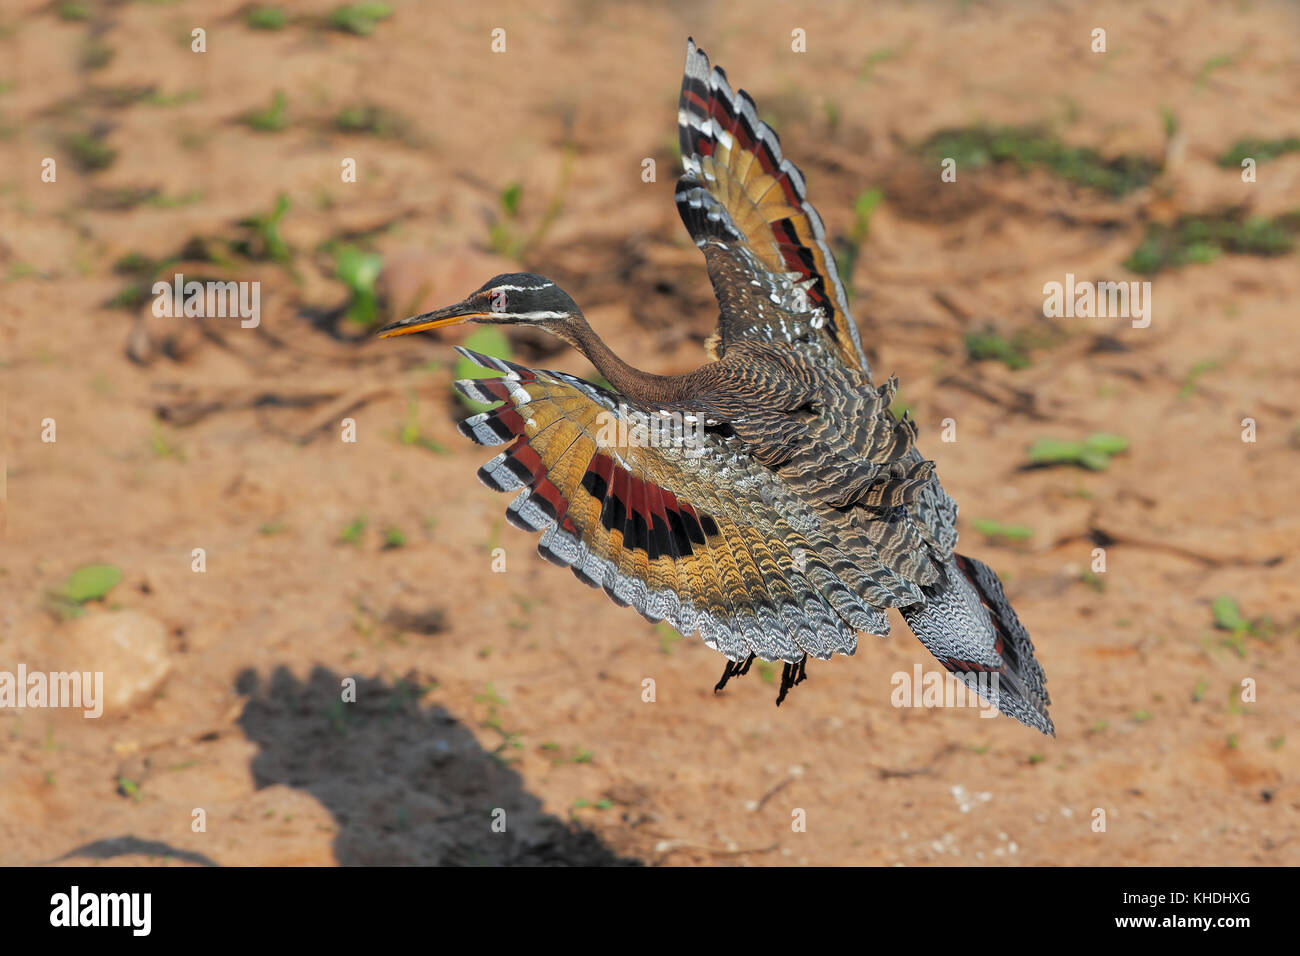 Flying Sunbittern while landing shows complicated and amazing wing pattern Stock Photo